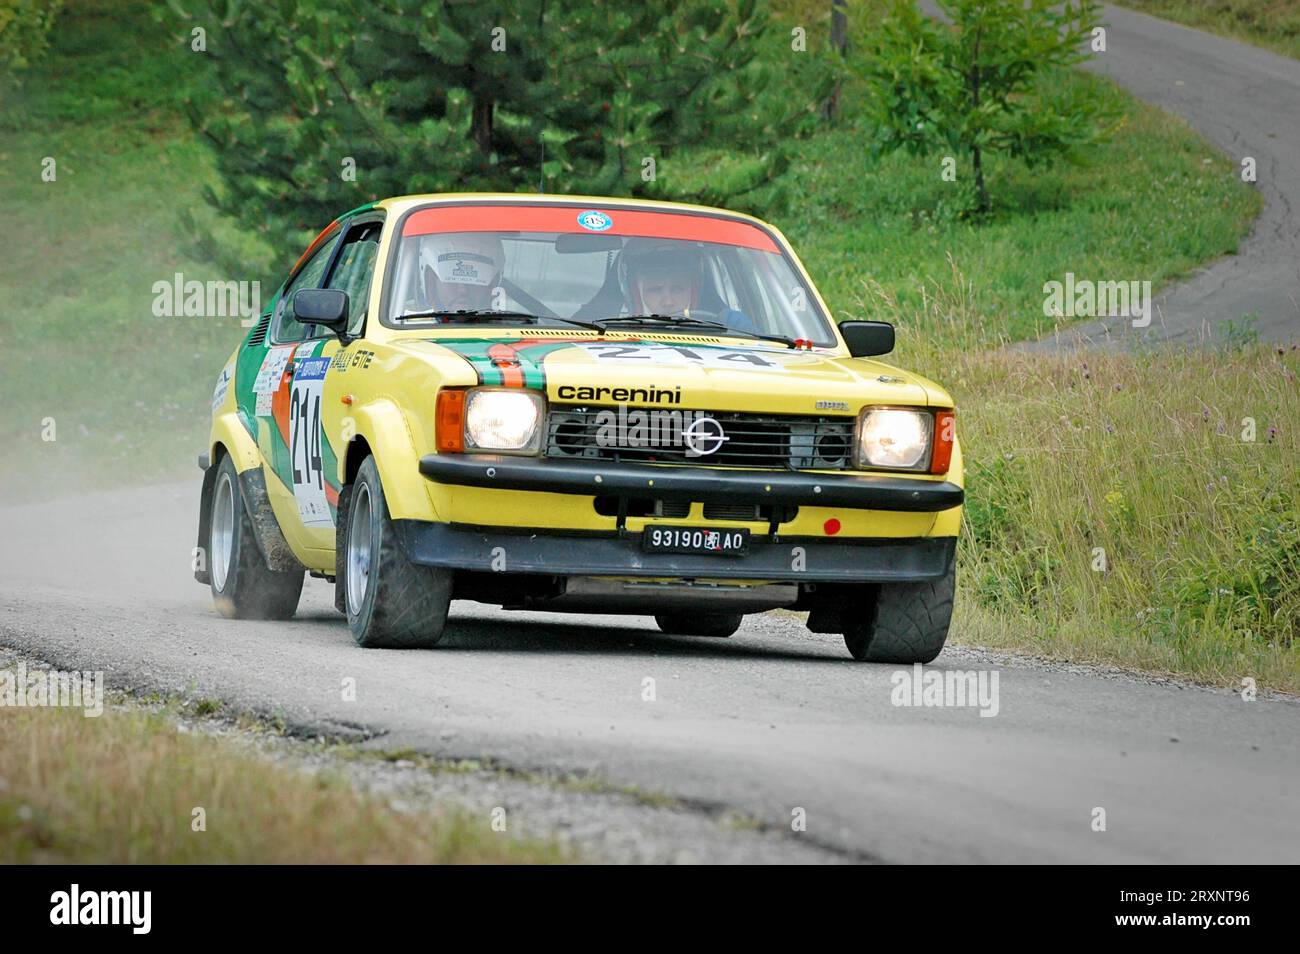 Italy - September 7, 2005 - Unidentified drivers on a yellow vintage Opel Kadett C Coupe racing car Stock Photo